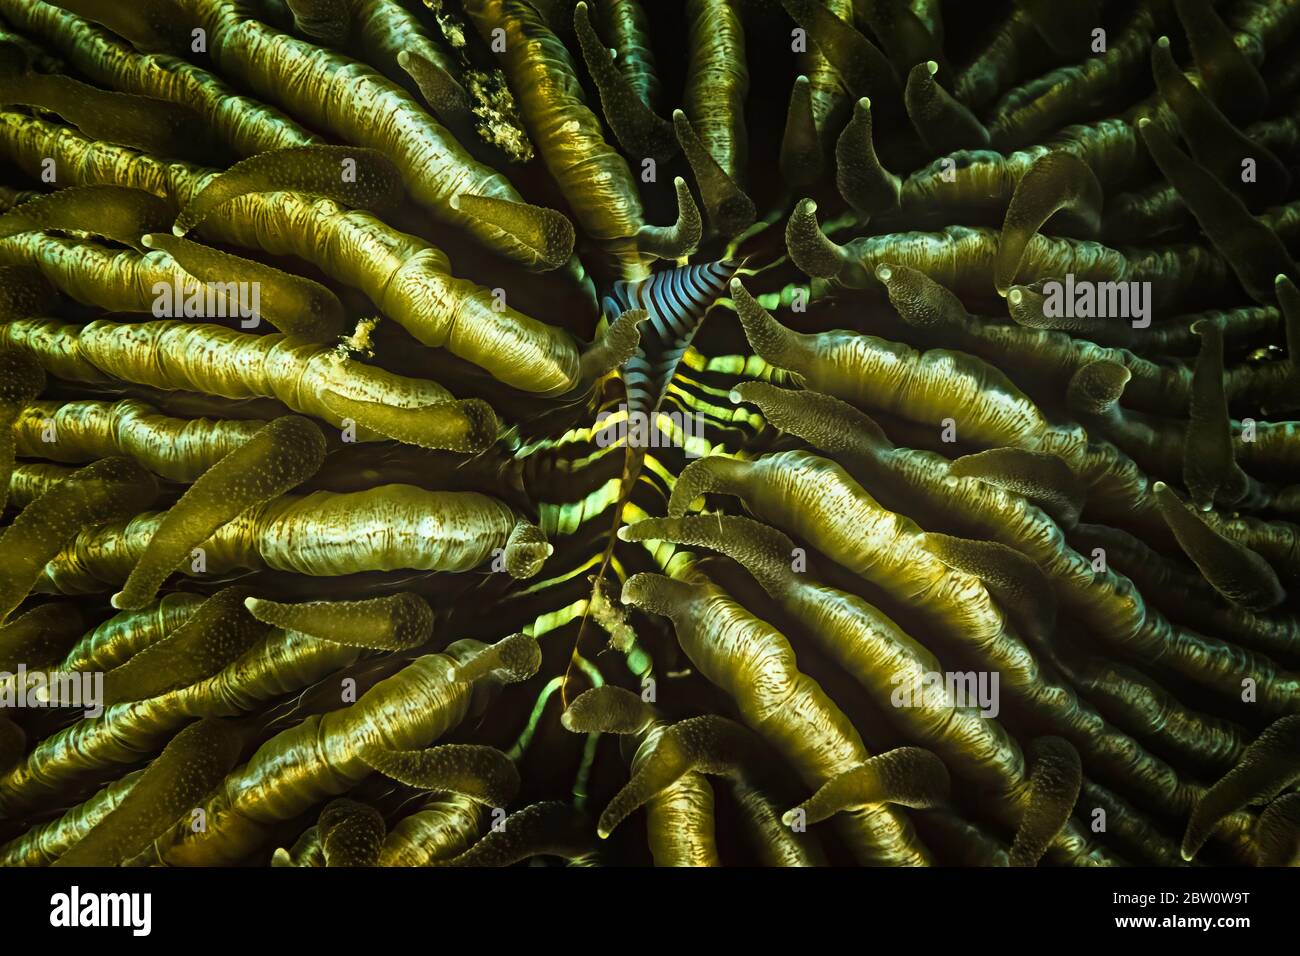 The mouth of a muchroom coral, Madagascar. Stock Photo